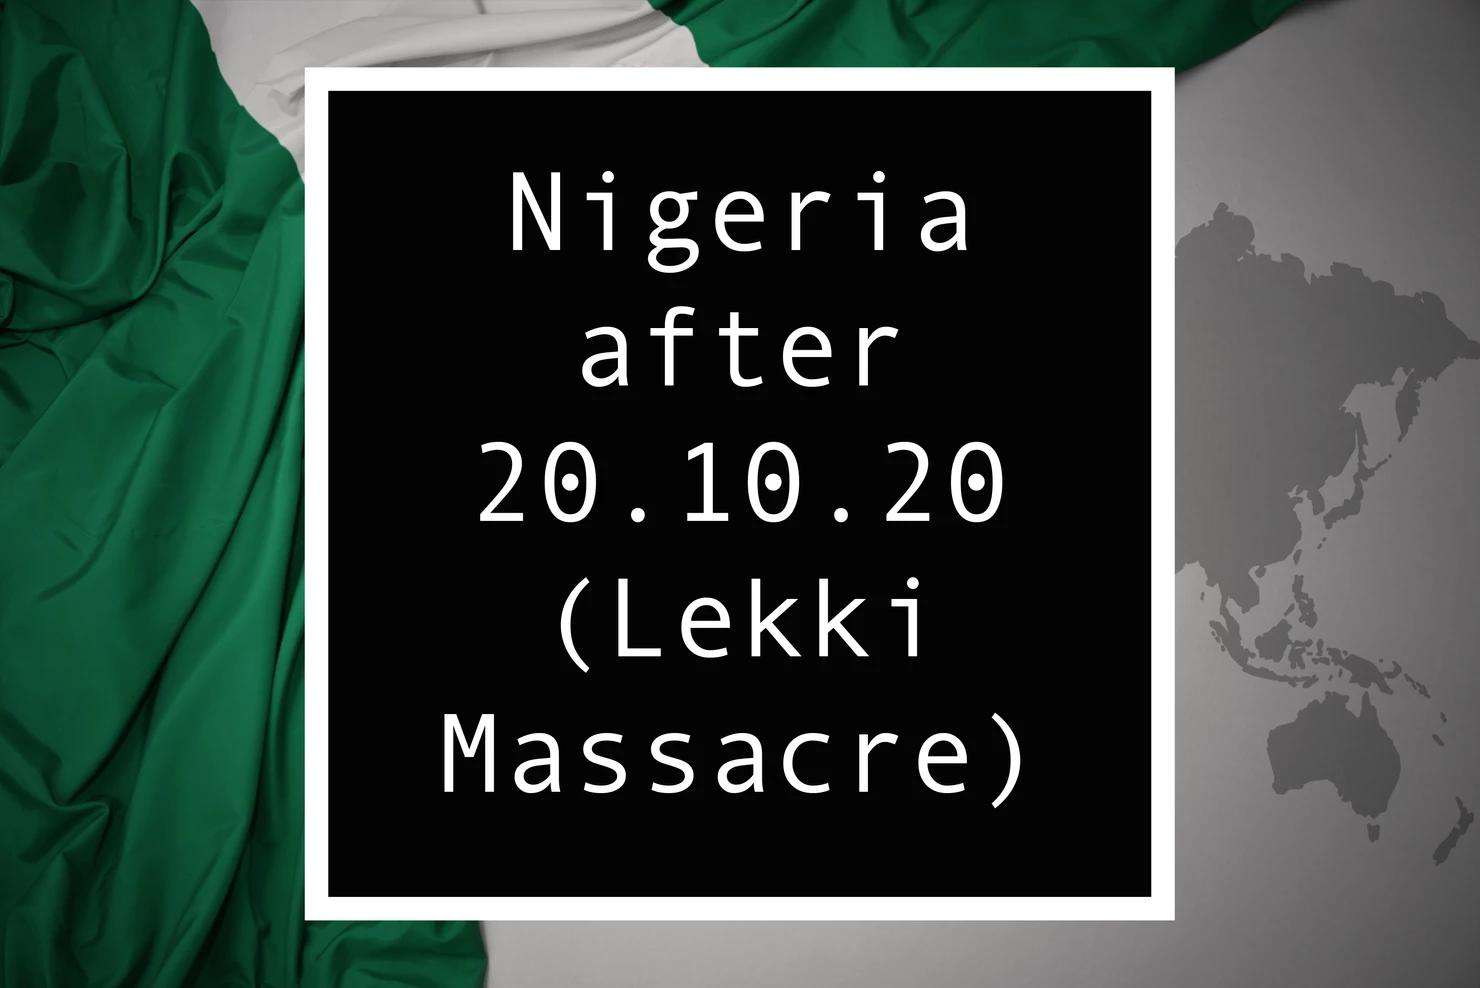 You are currently viewing Nigeria after the Lekki Massacre of 20.10.20